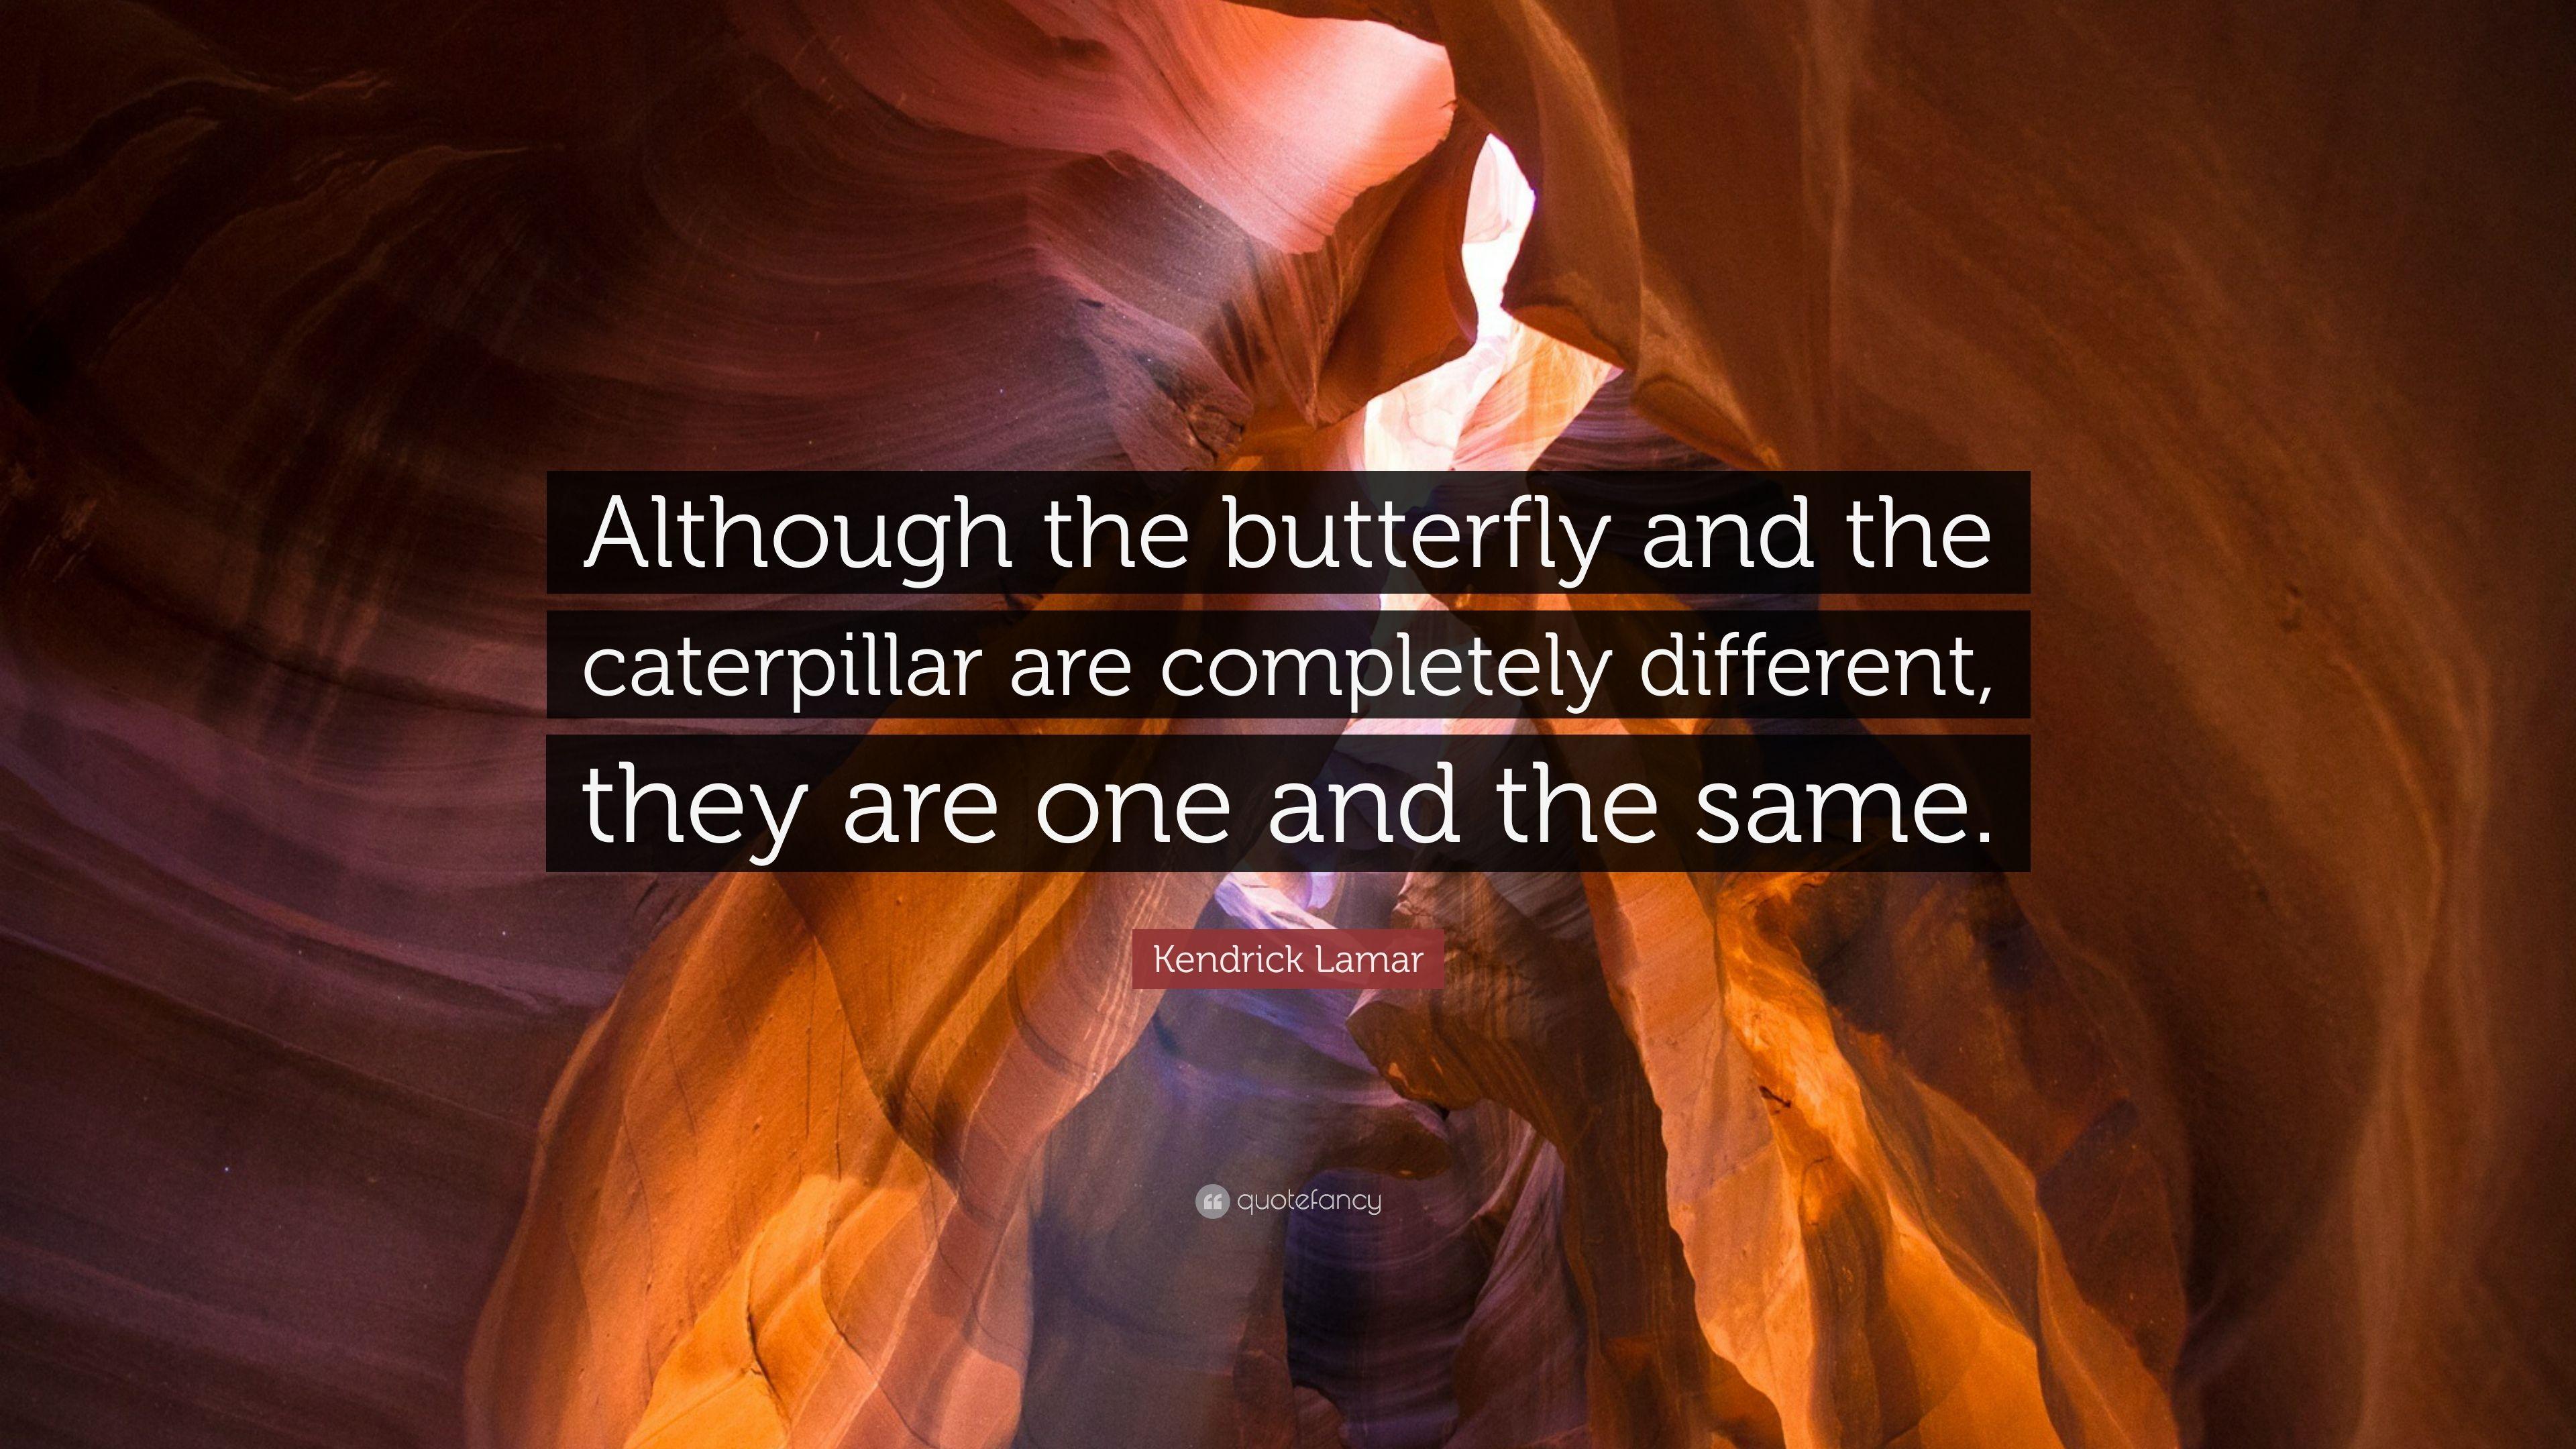 Kendrick Lamar Quote: “Although the butterfly and the caterpillar